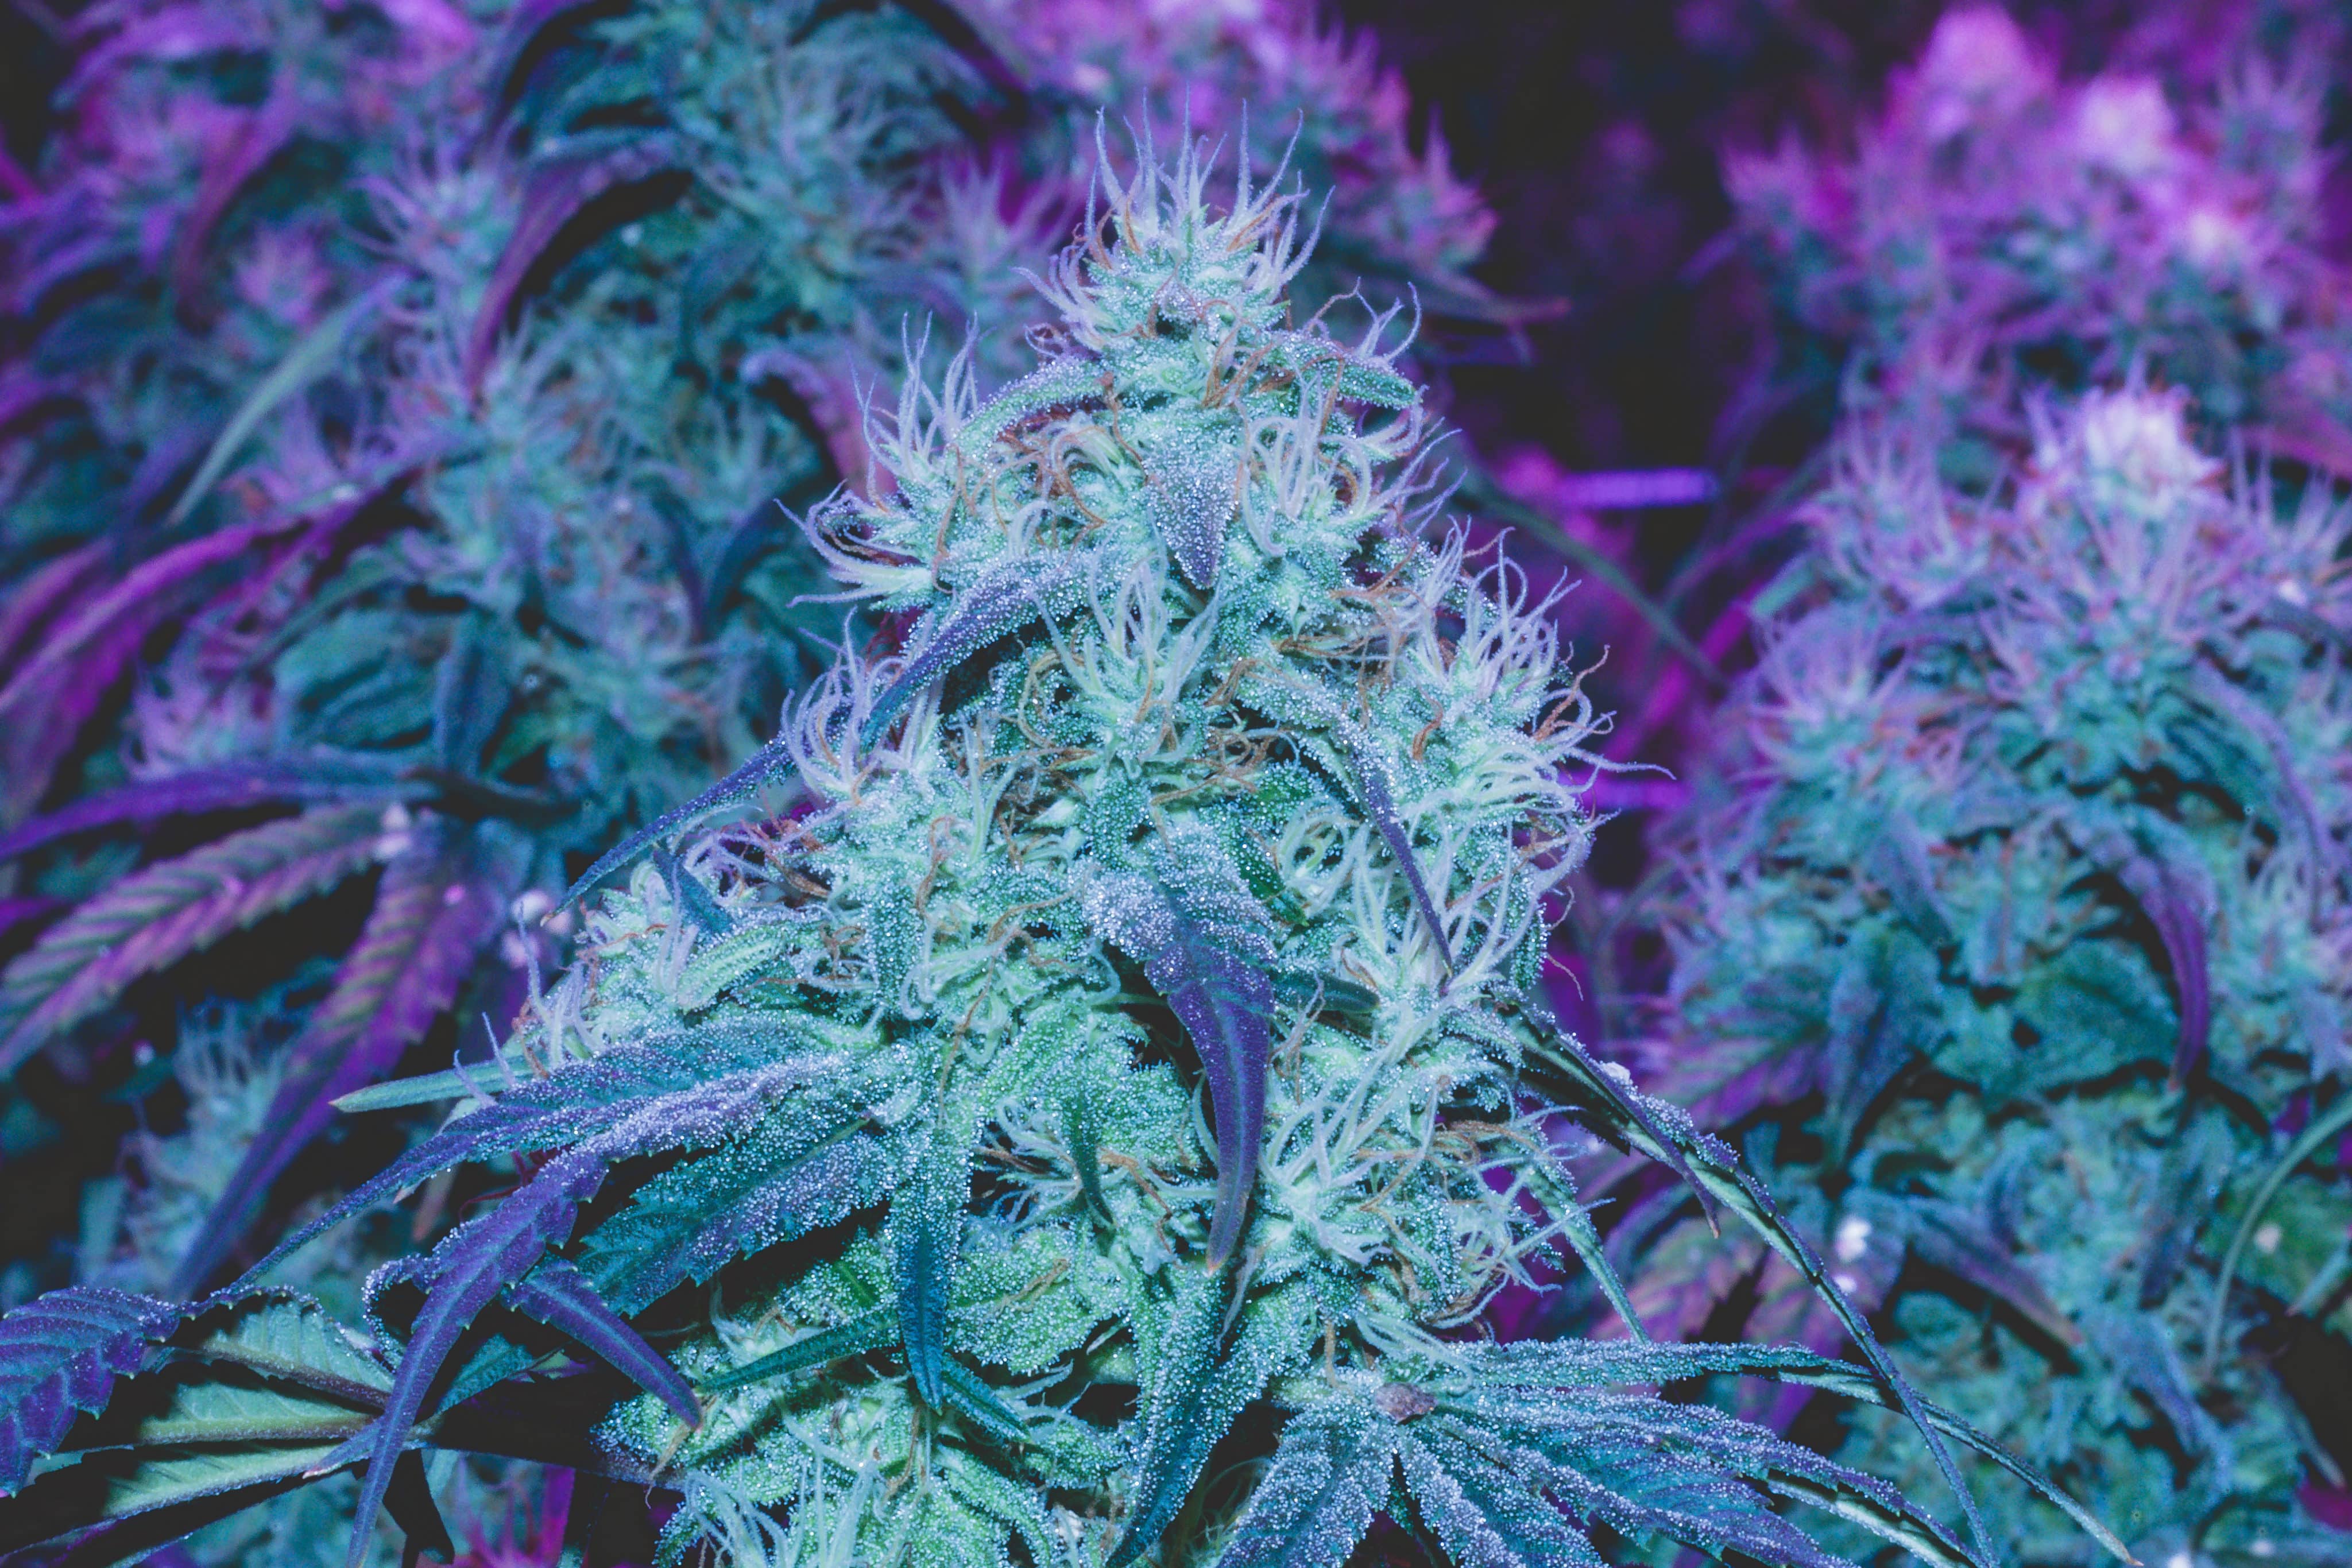 Quality Genetics: The Most Important Factor in Cannabis Sales and Marketing